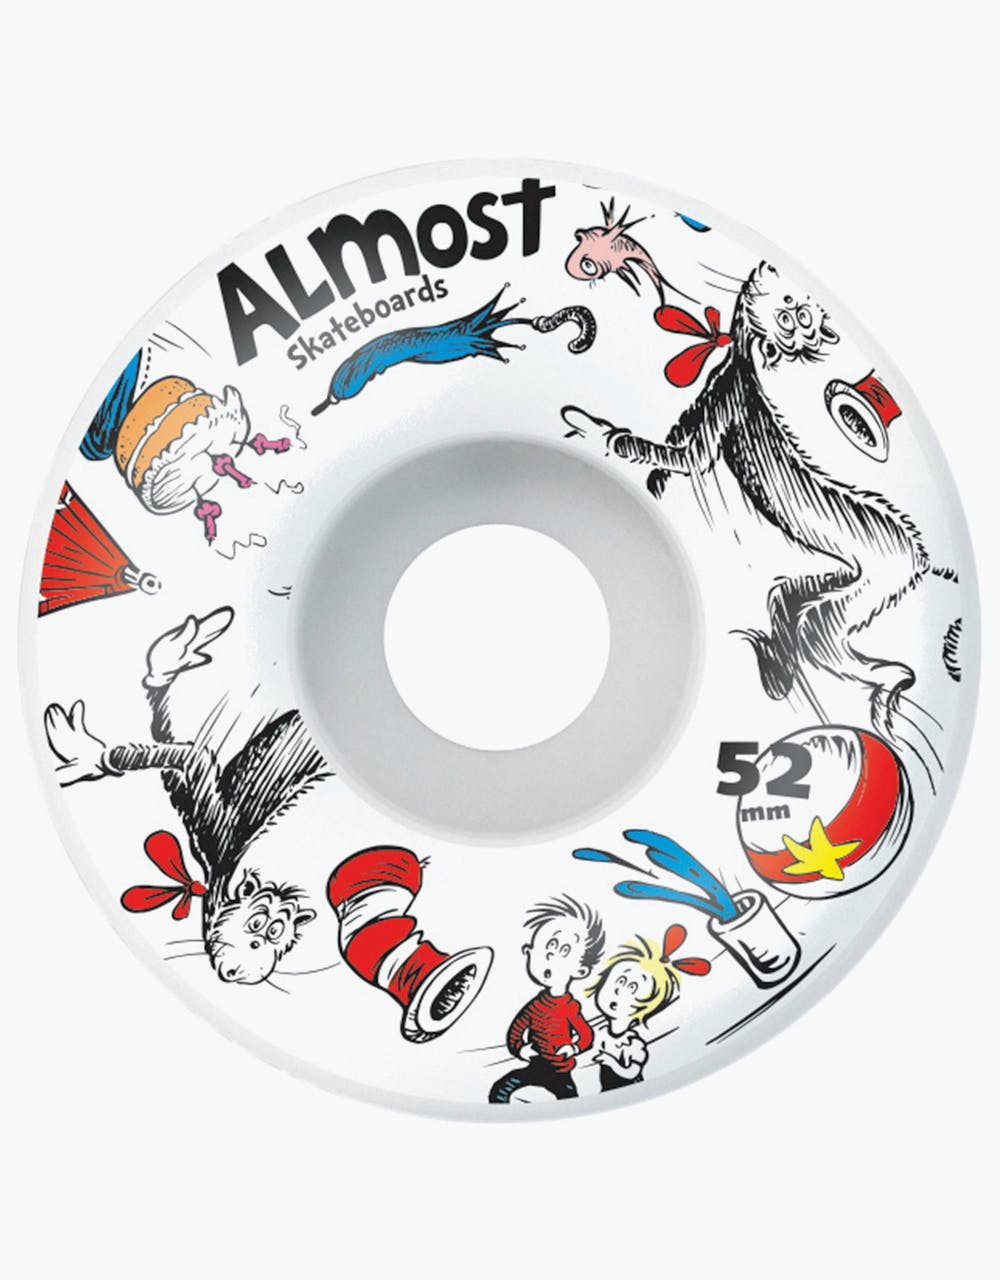 Almost x Dr. Seuss Cat Face Complete Skateboard - 7.875"